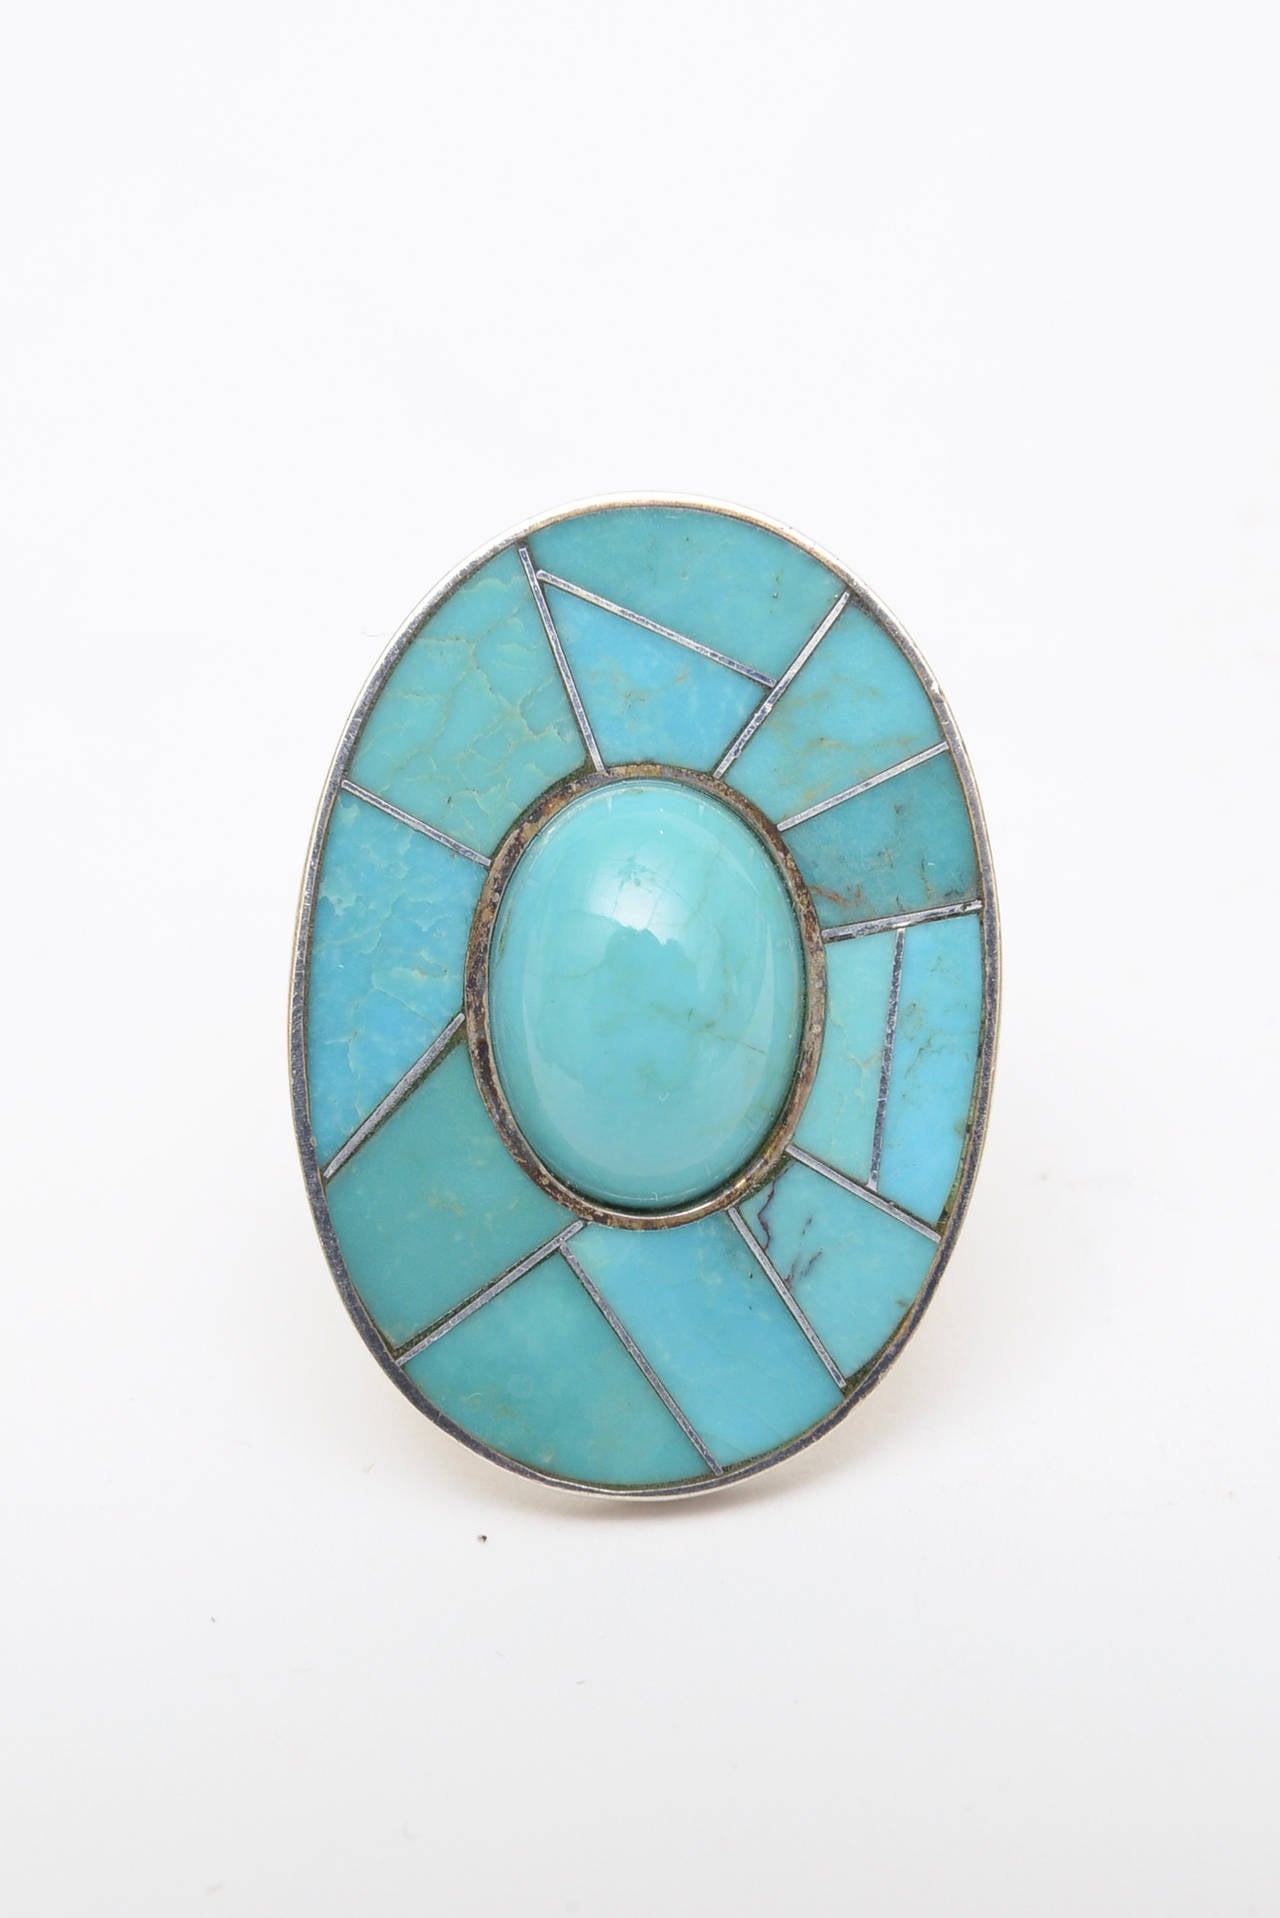 This cabochon turquoise center stone is offset like a pie with other turquoise surrounding sterling silver cross lines. This vintage ring is large and makes a great statement. This is for the woman who has a longer hand and loves dramatic jewelry